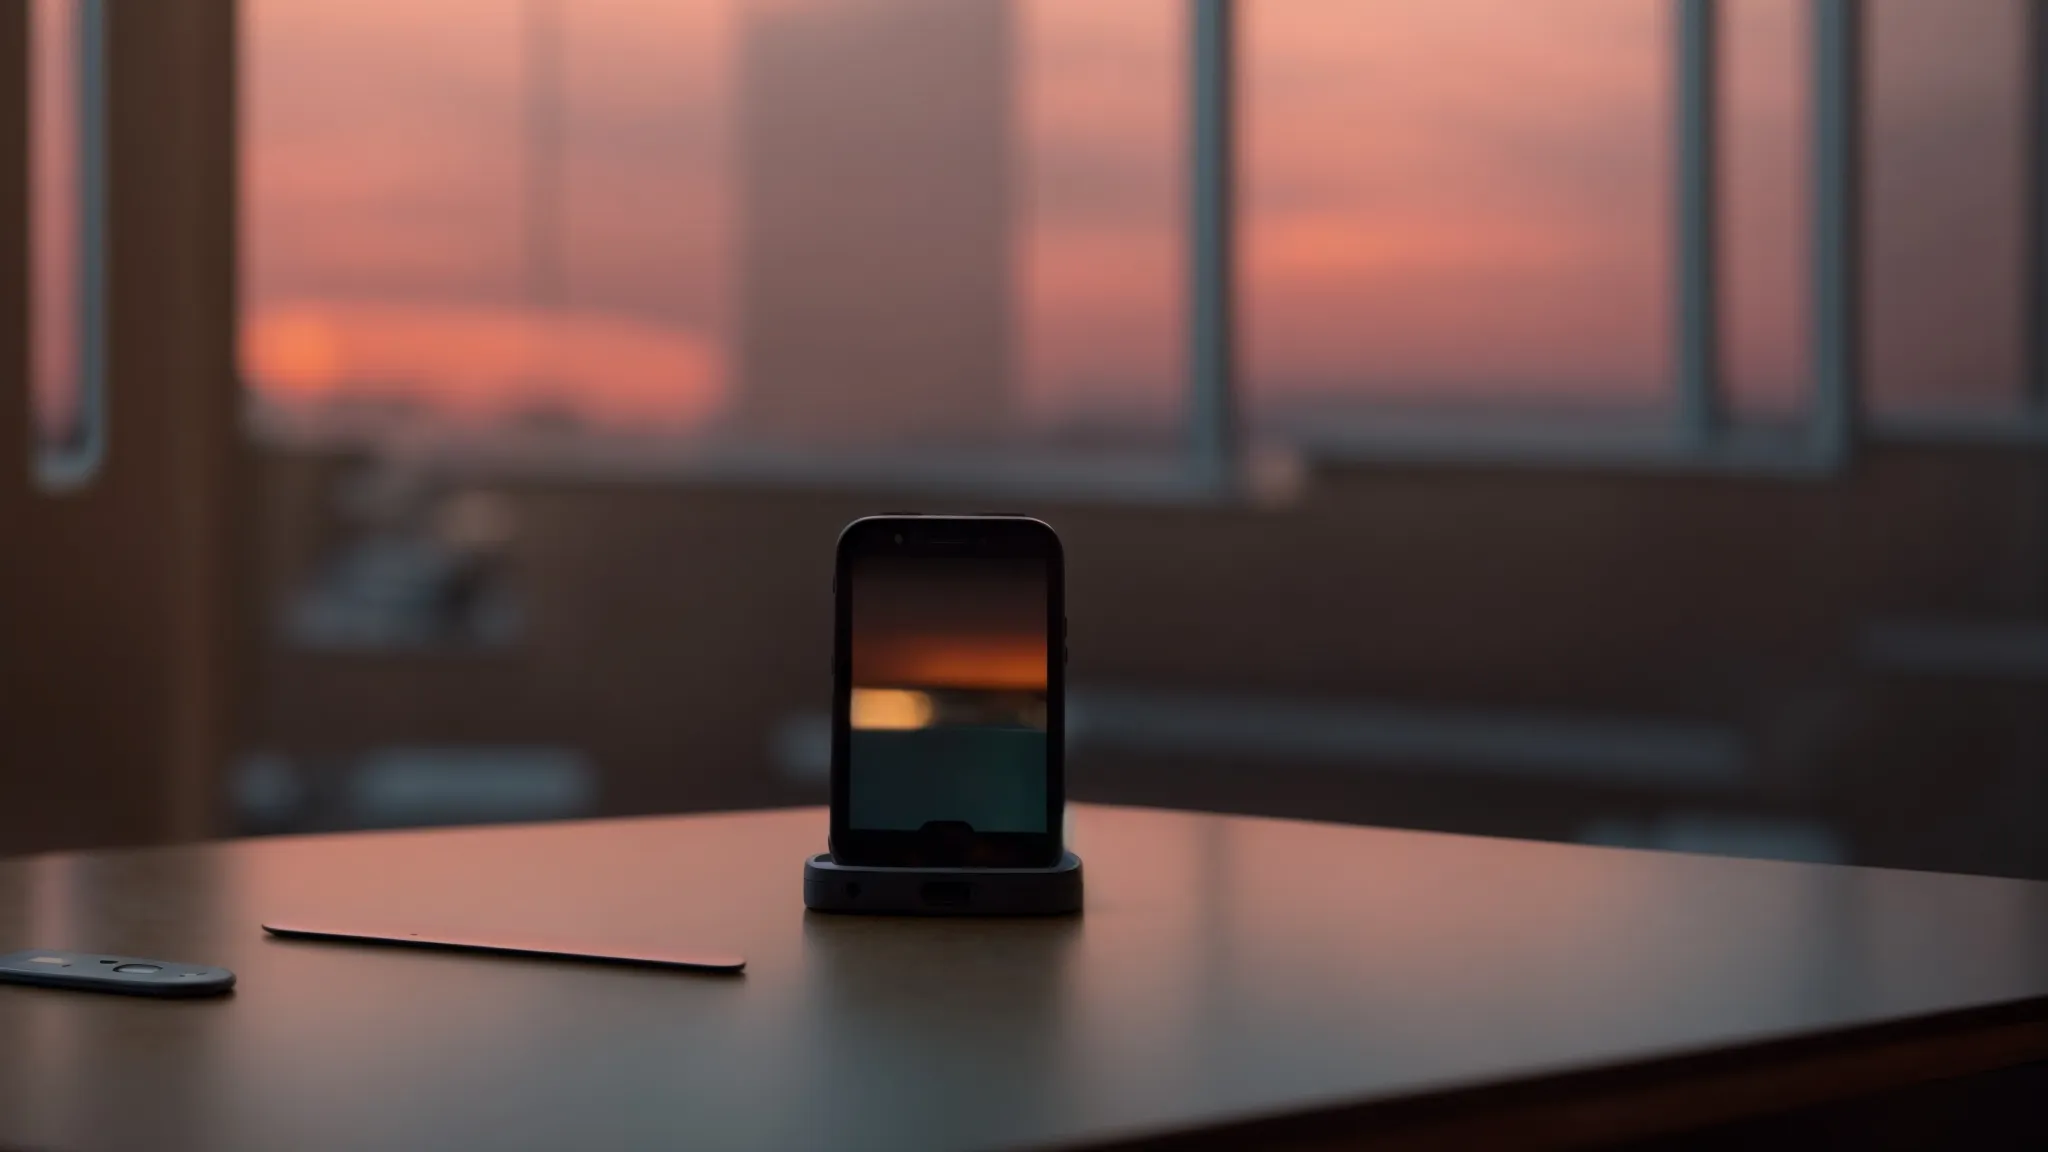 a solitary smartphone lies on a desk, bathed in the eerie glow of an incoming call from an unrecognizable yet seemingly local number.